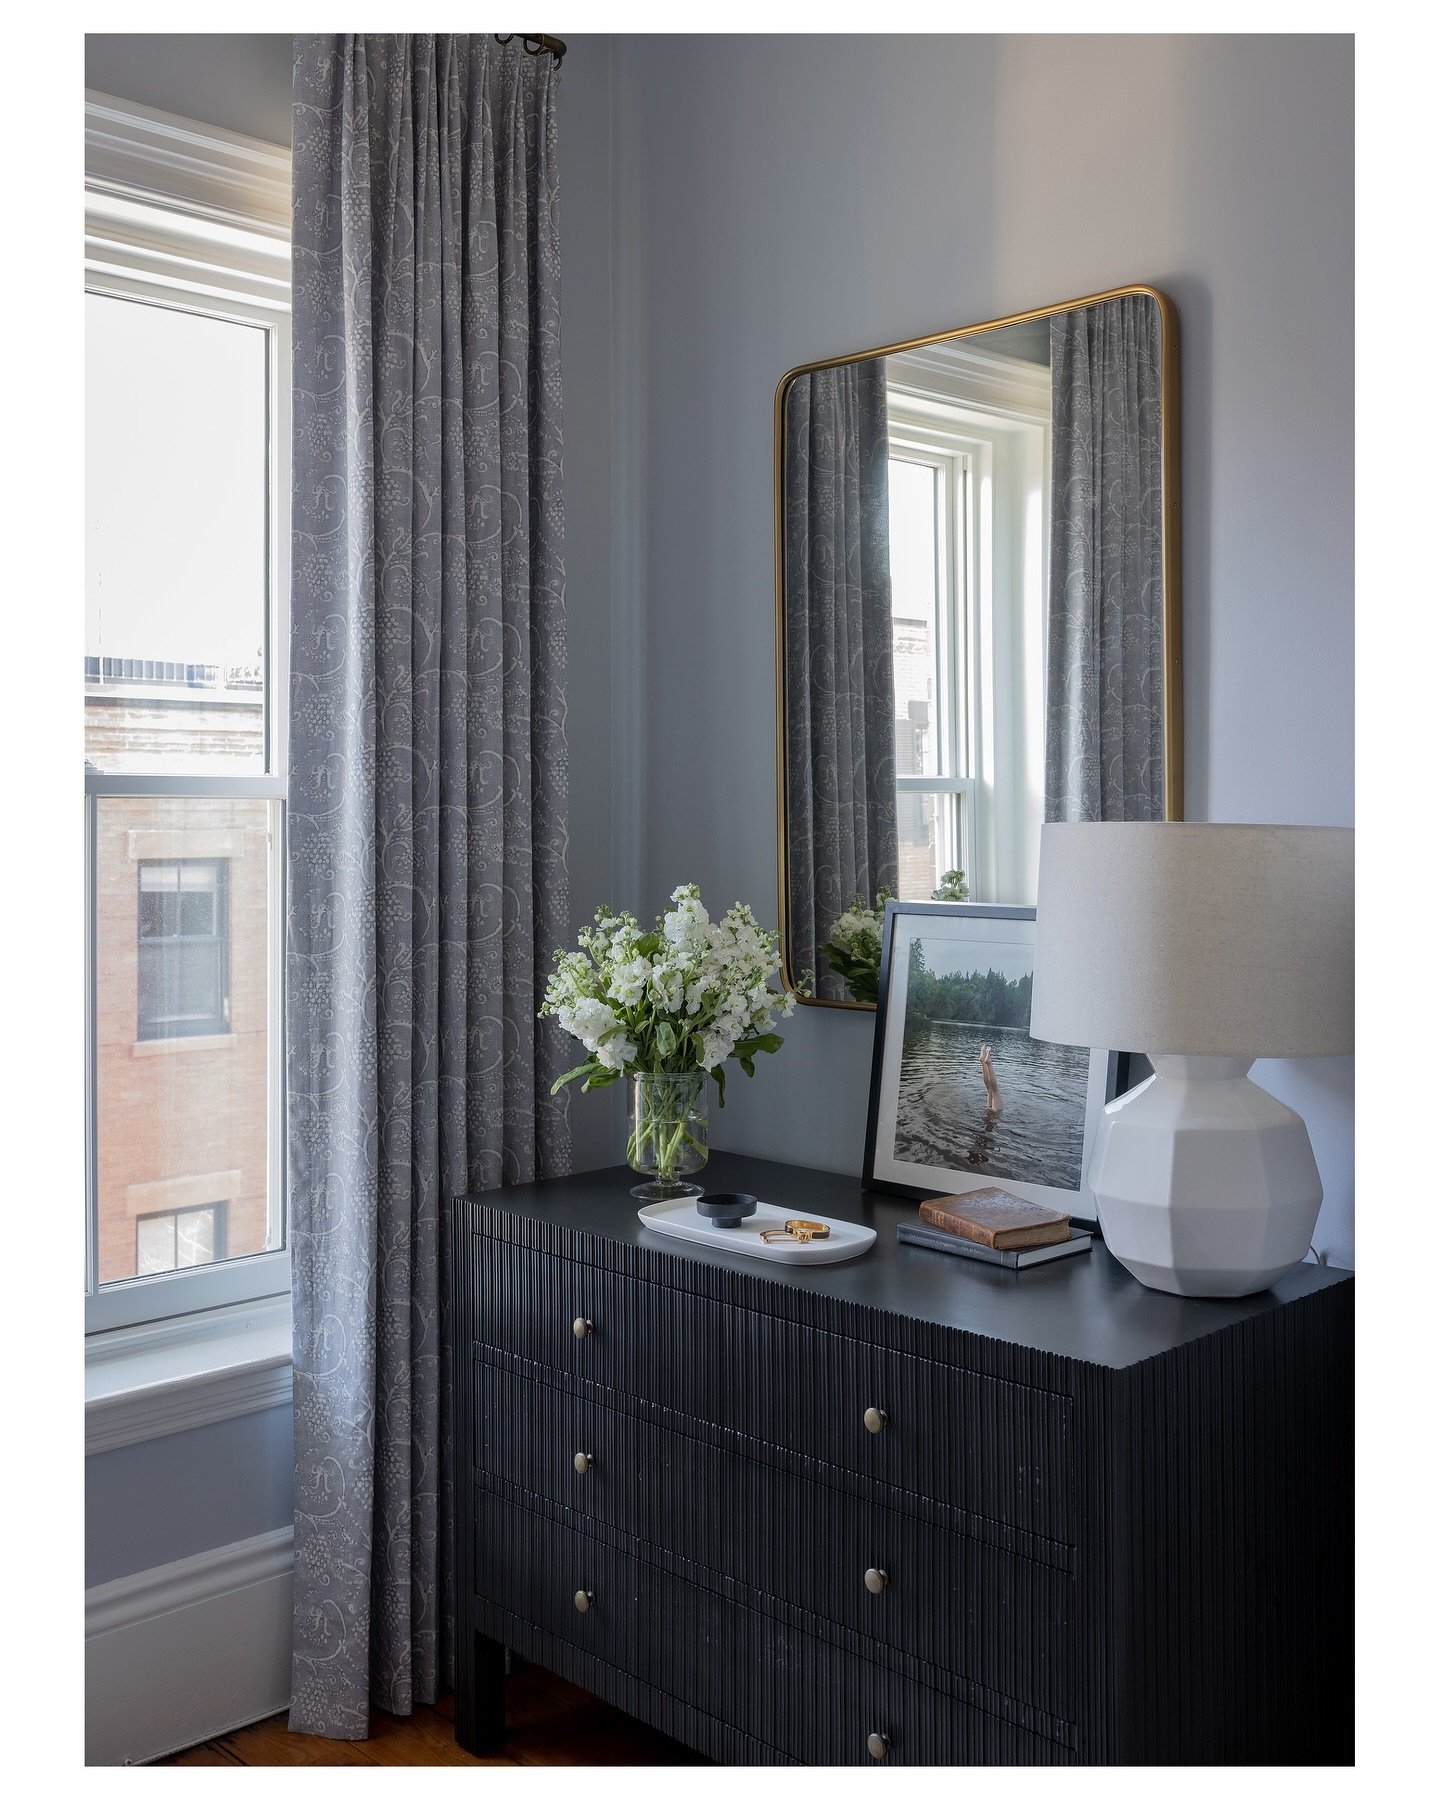 Planning on summer guests? Time to get those rooms where you hide everything (maybe it&rsquo;s just me) cleaned out and ready for the show. 

📷 @michaeljleephotography 

#charlestownma #bostonhomedecor #boston #bostonhomemagazine #bostondesign #city